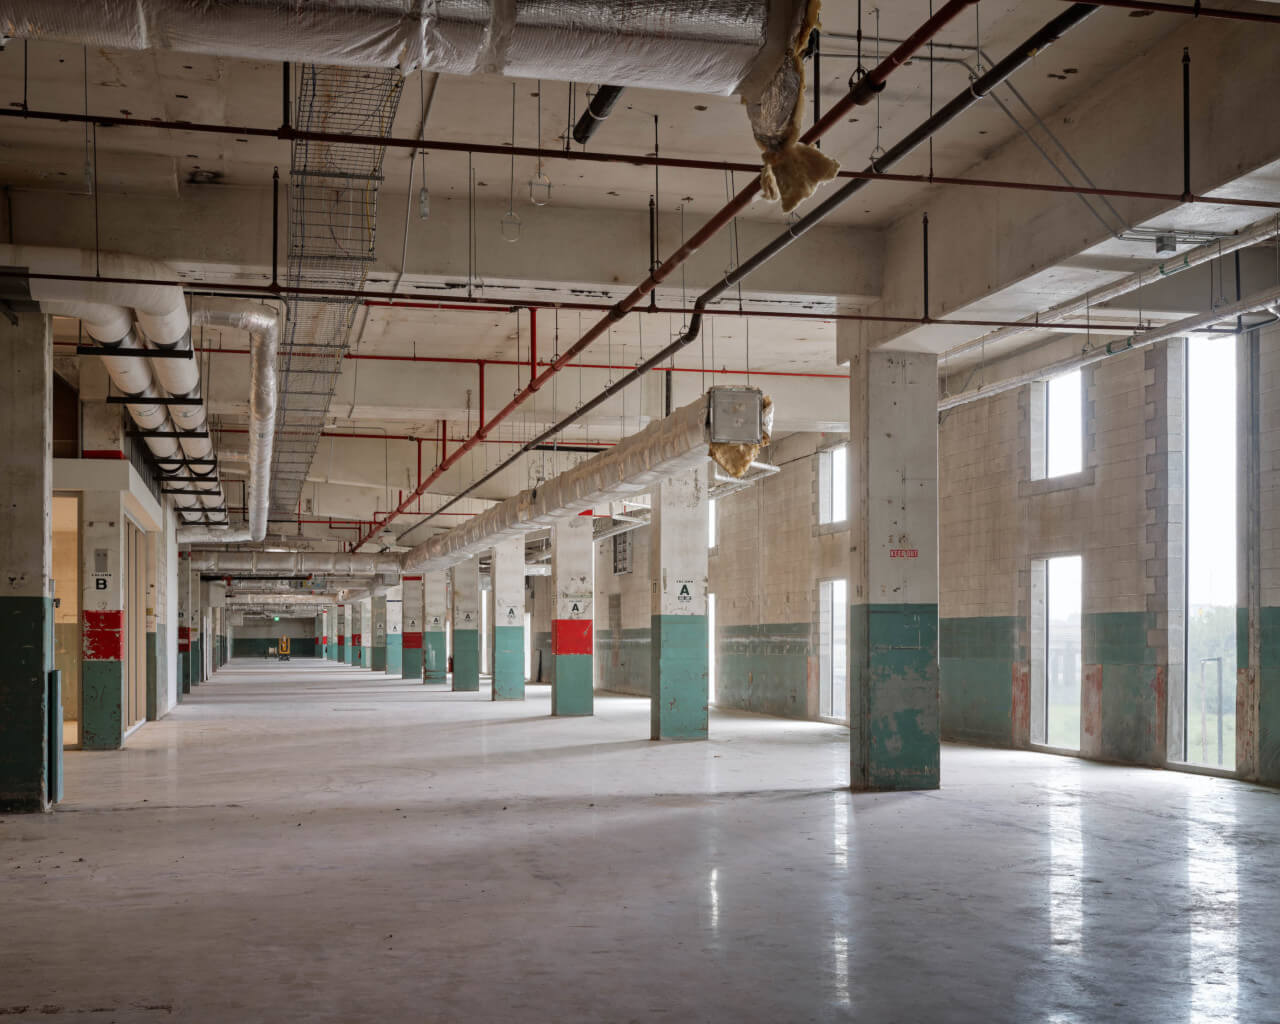 interior view of a massive warehouse space